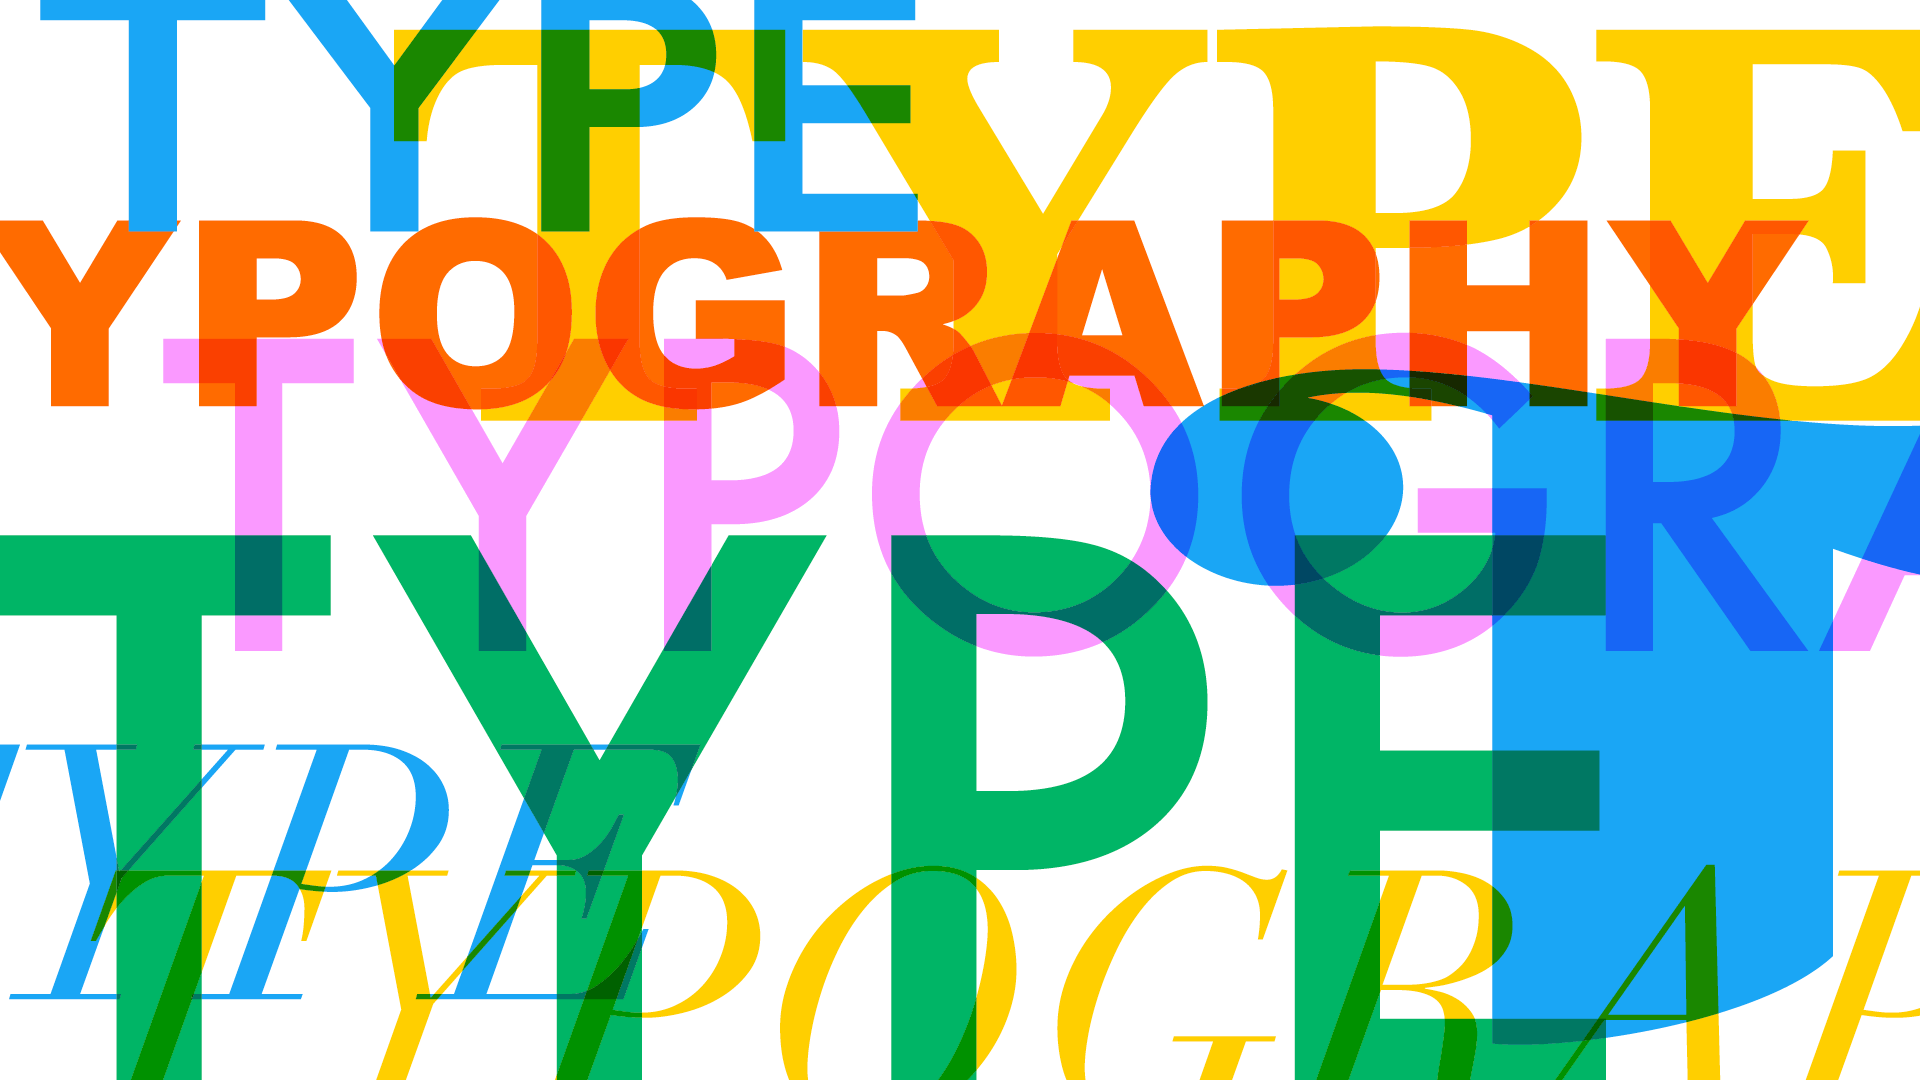 LEARN: All About Text: How to Ensure Legible Typography in Inkjet